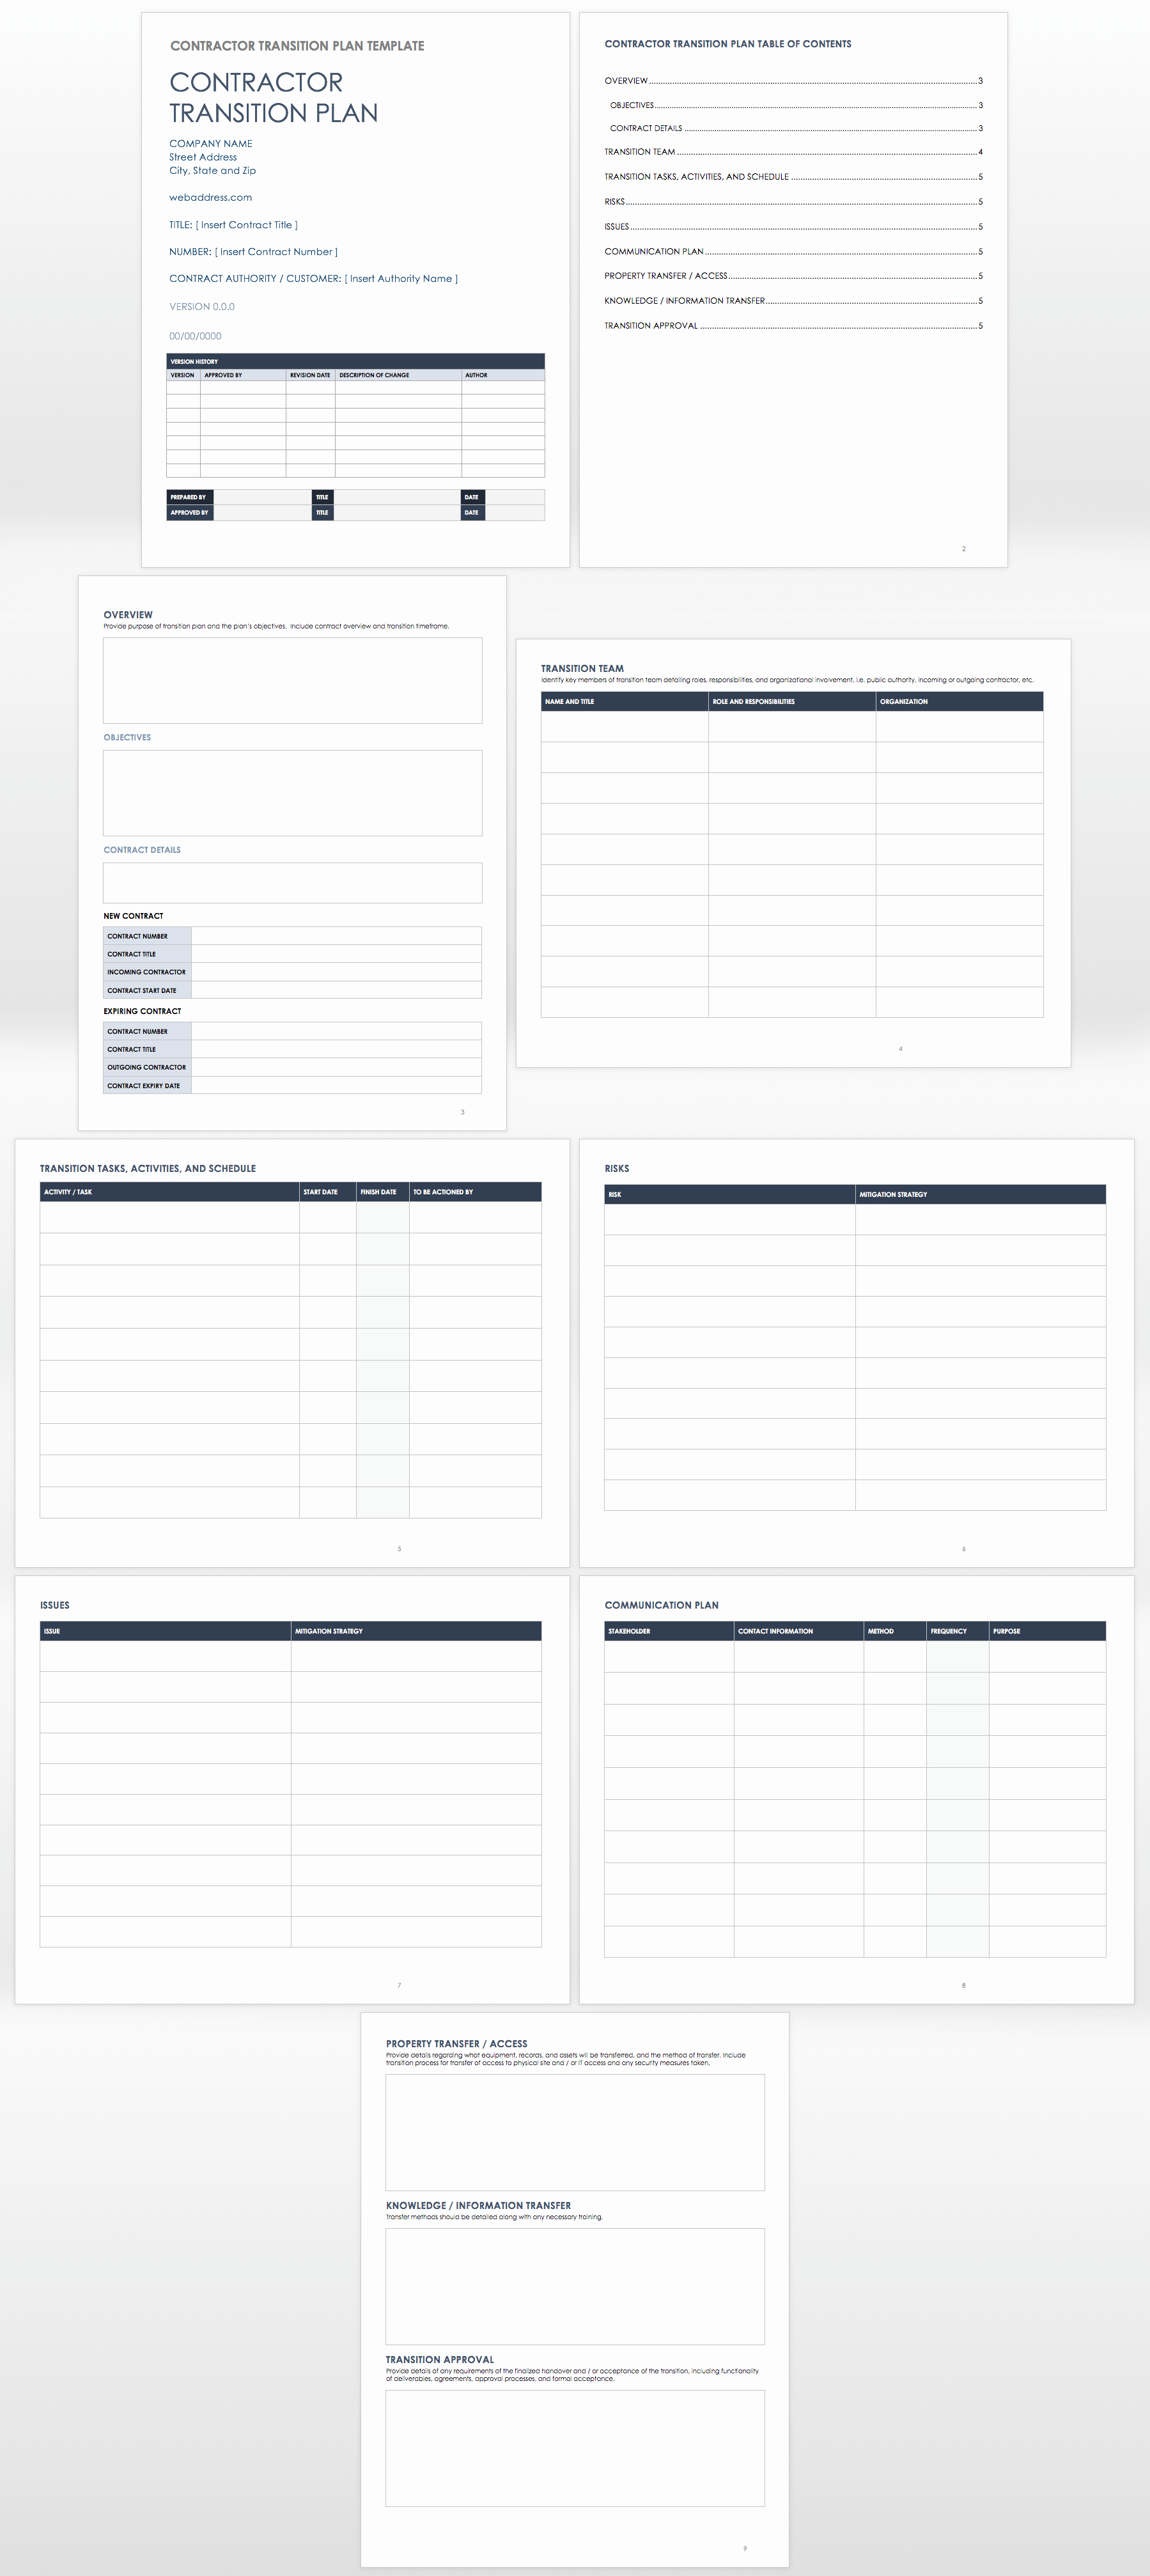 Business Transition Plan Template Fresh Free Business Transition Plan Templates